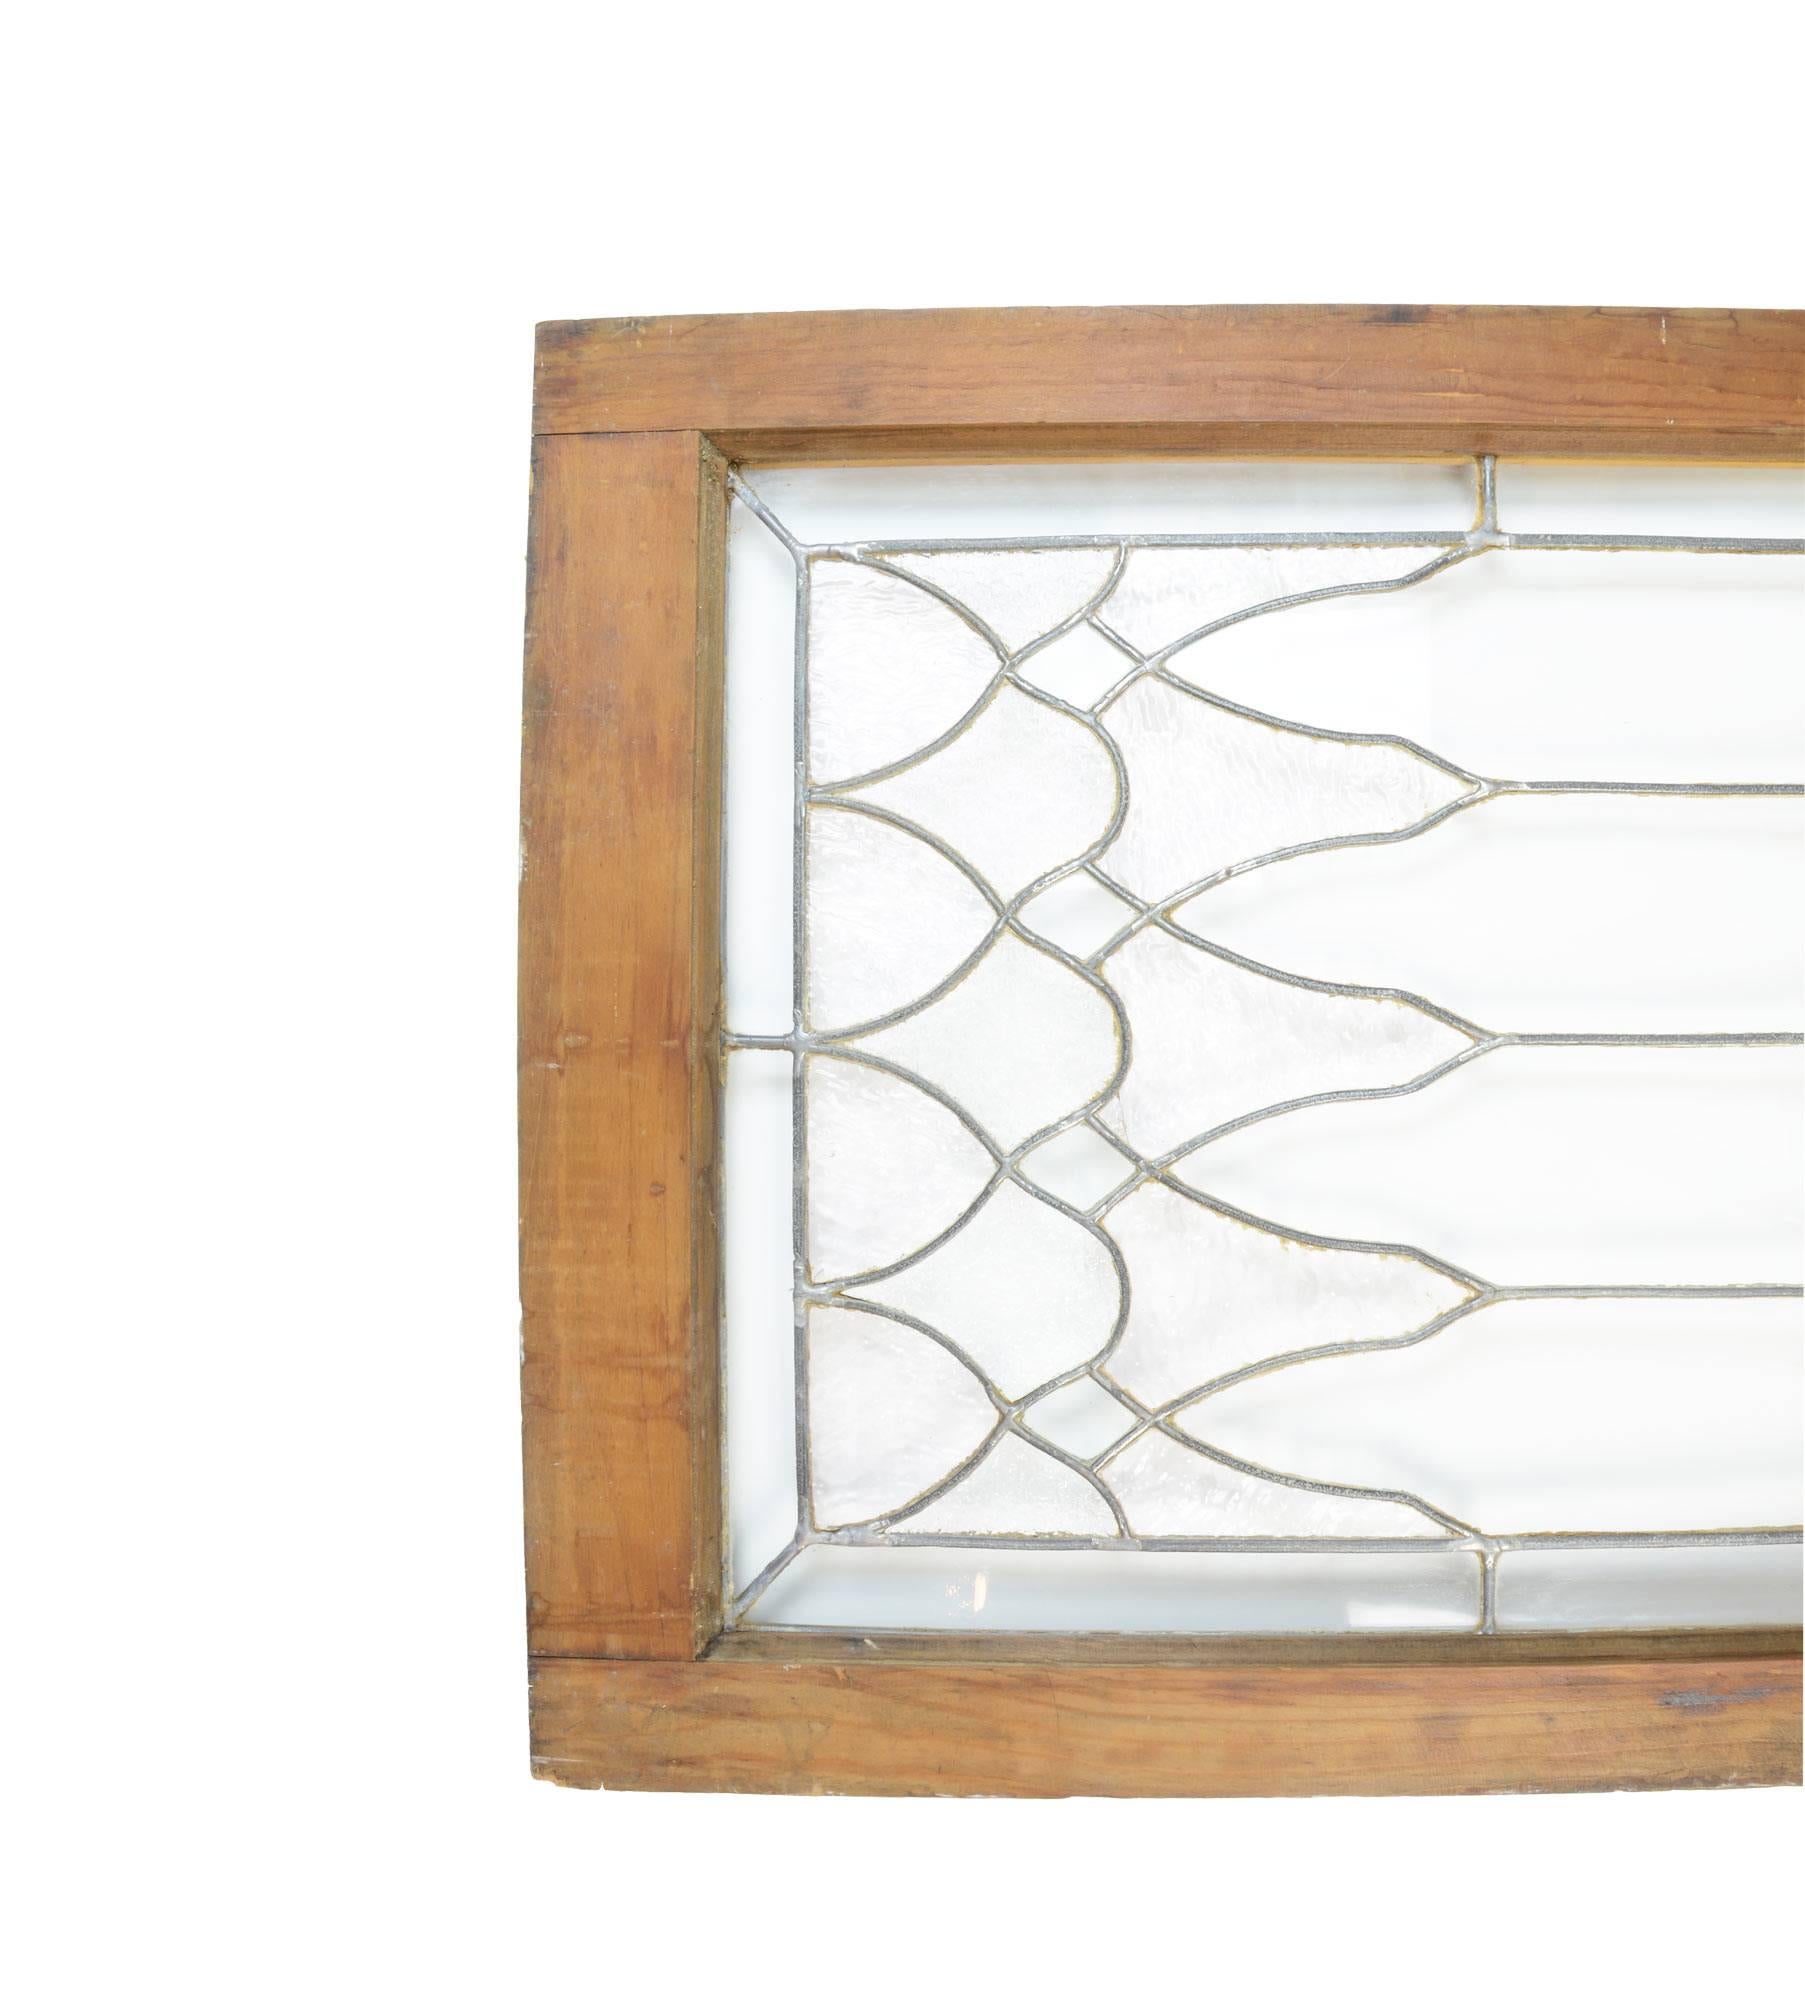 This beautiful Victorian transom leaded glass window features clear jewels, and an ornate inter-looping pattern. Because the patterns are geometric, it could also work vertically.